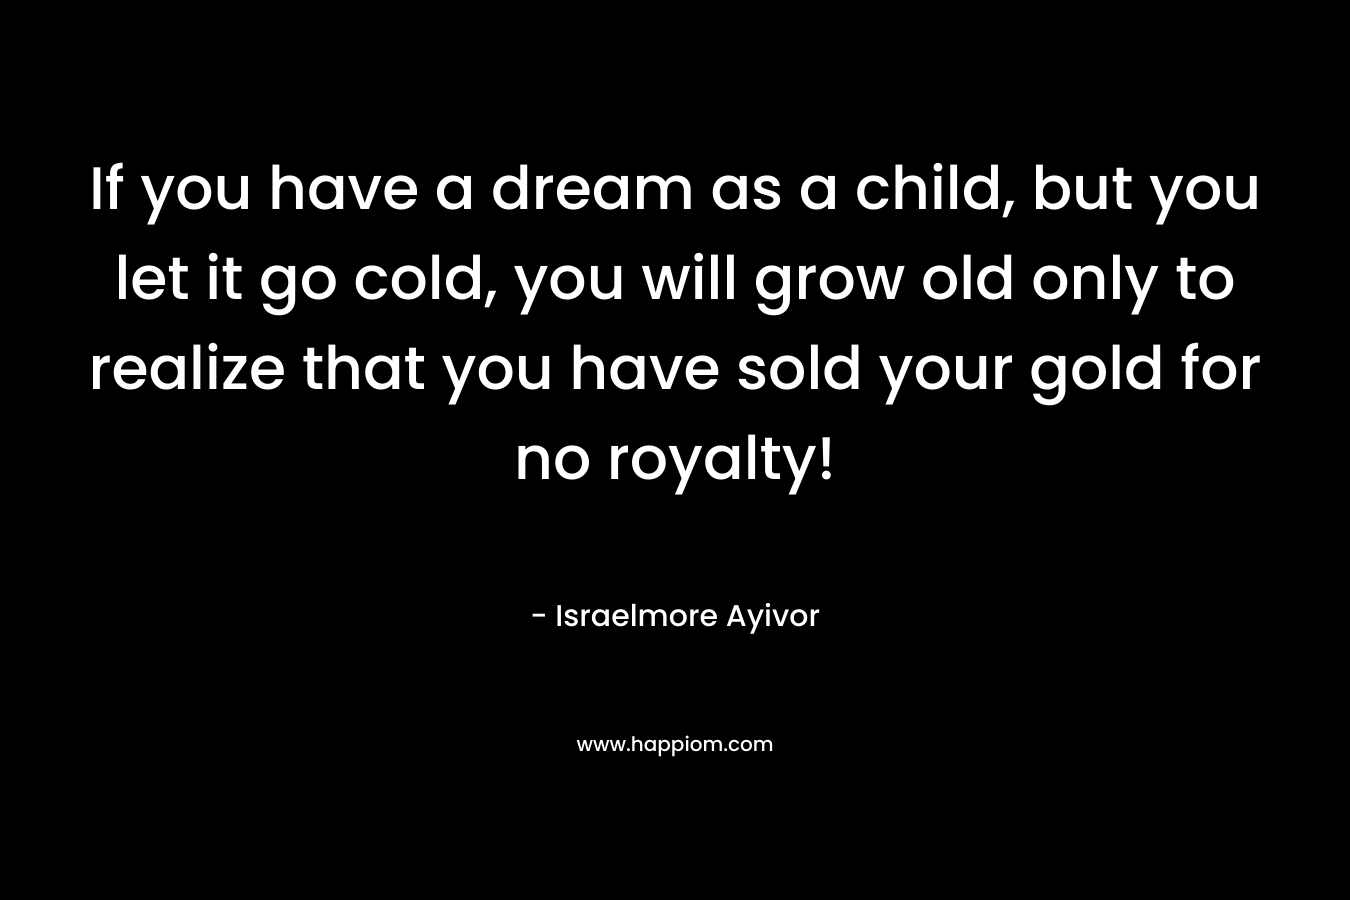 If you have a dream as a child, but you let it go cold, you will grow old only to realize that you have sold your gold for no royalty!